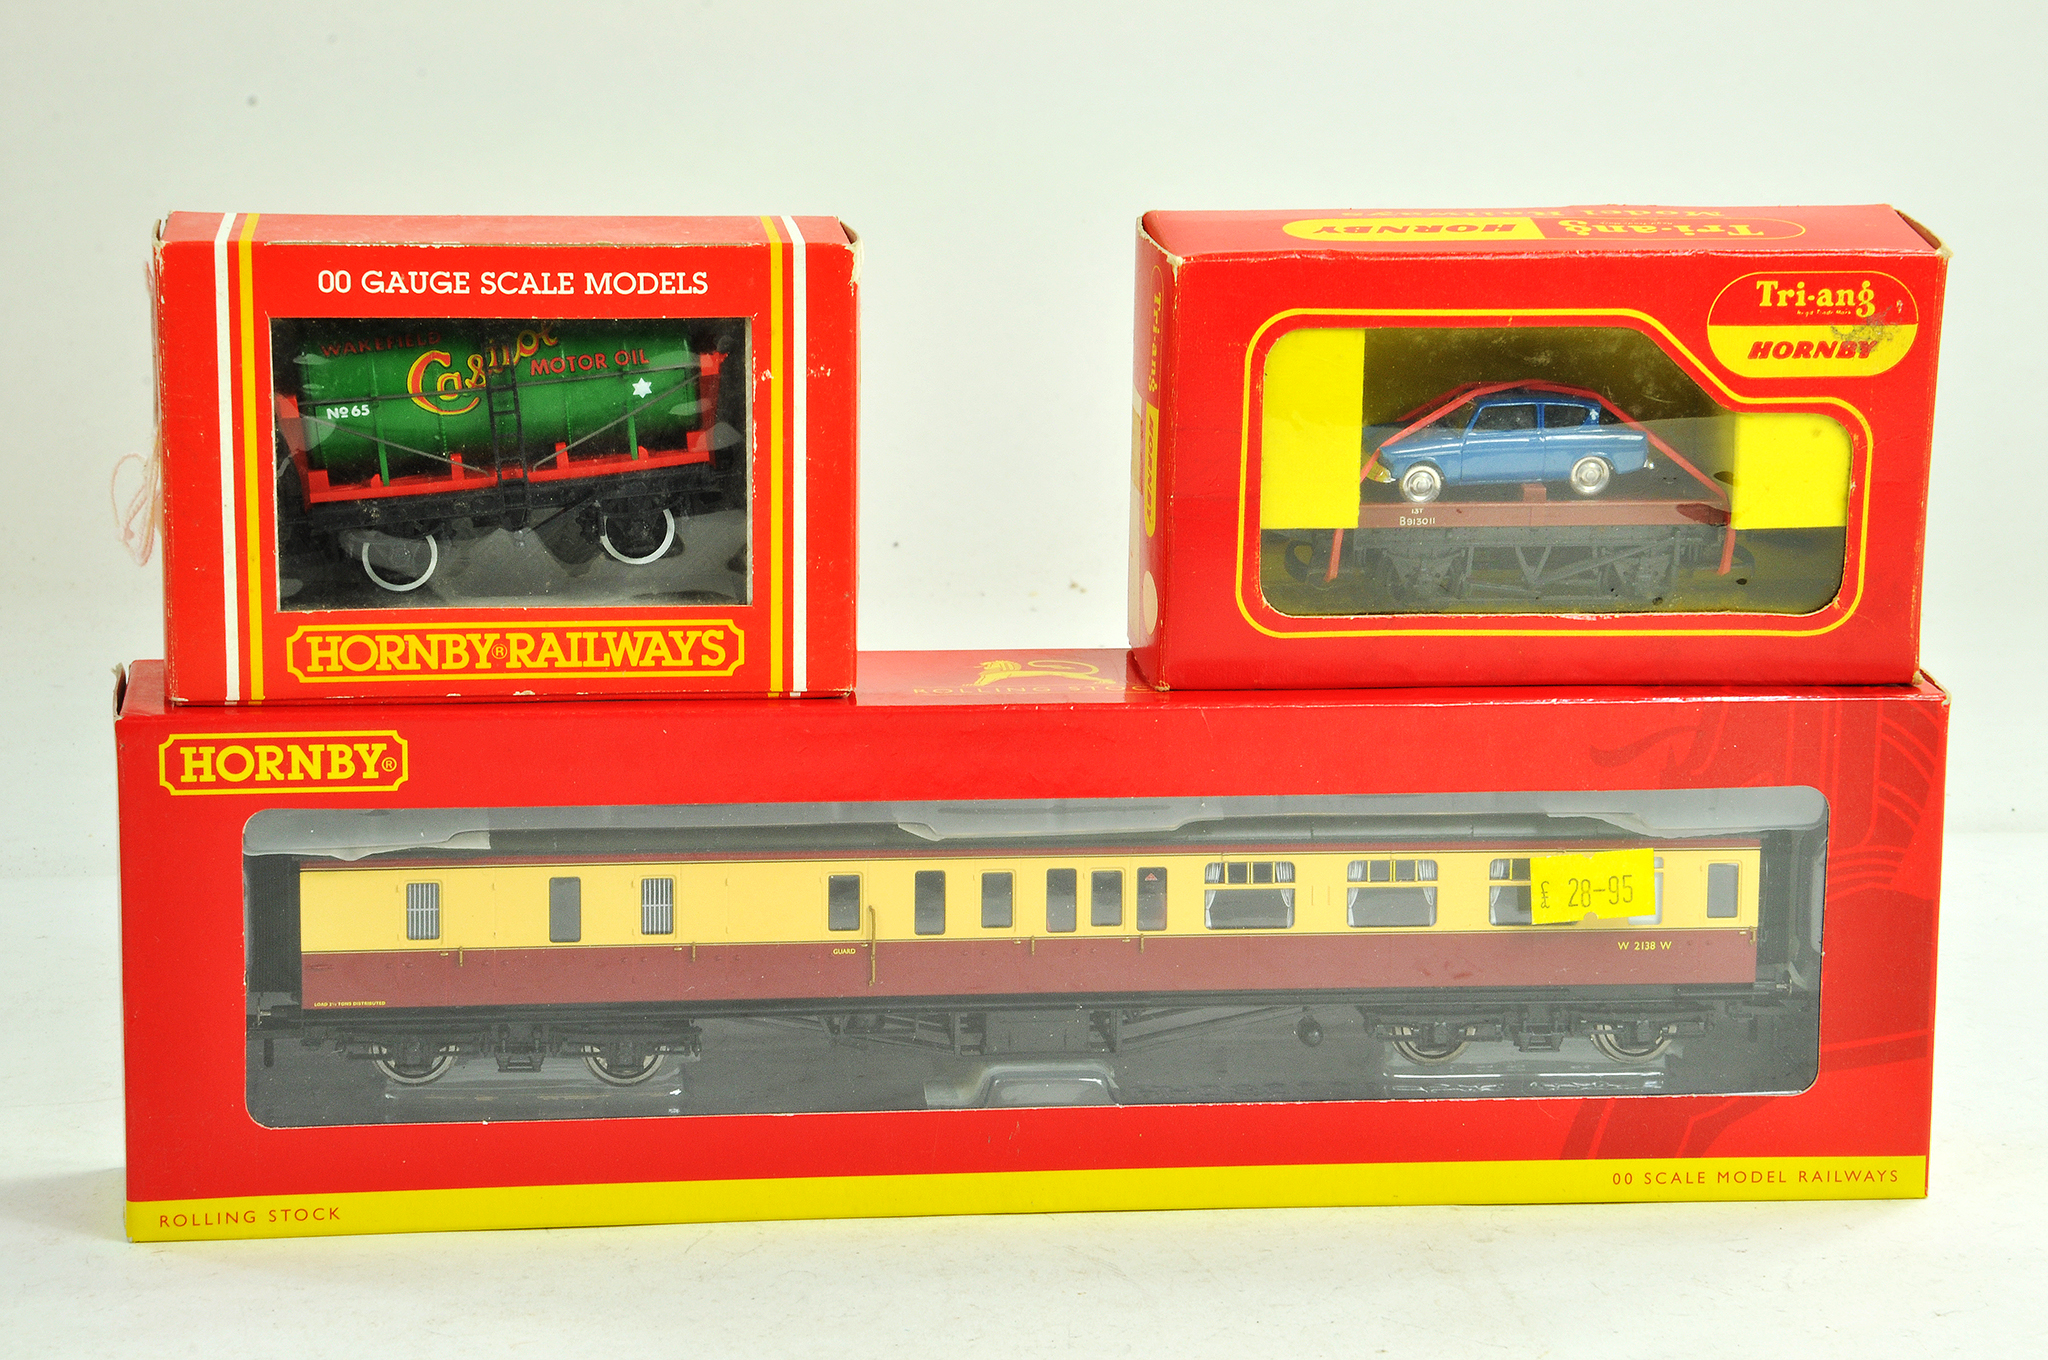 Hornby 00 Gauge Model Railway issues comprising Rolling stock issues. Castrol Tanker, Car